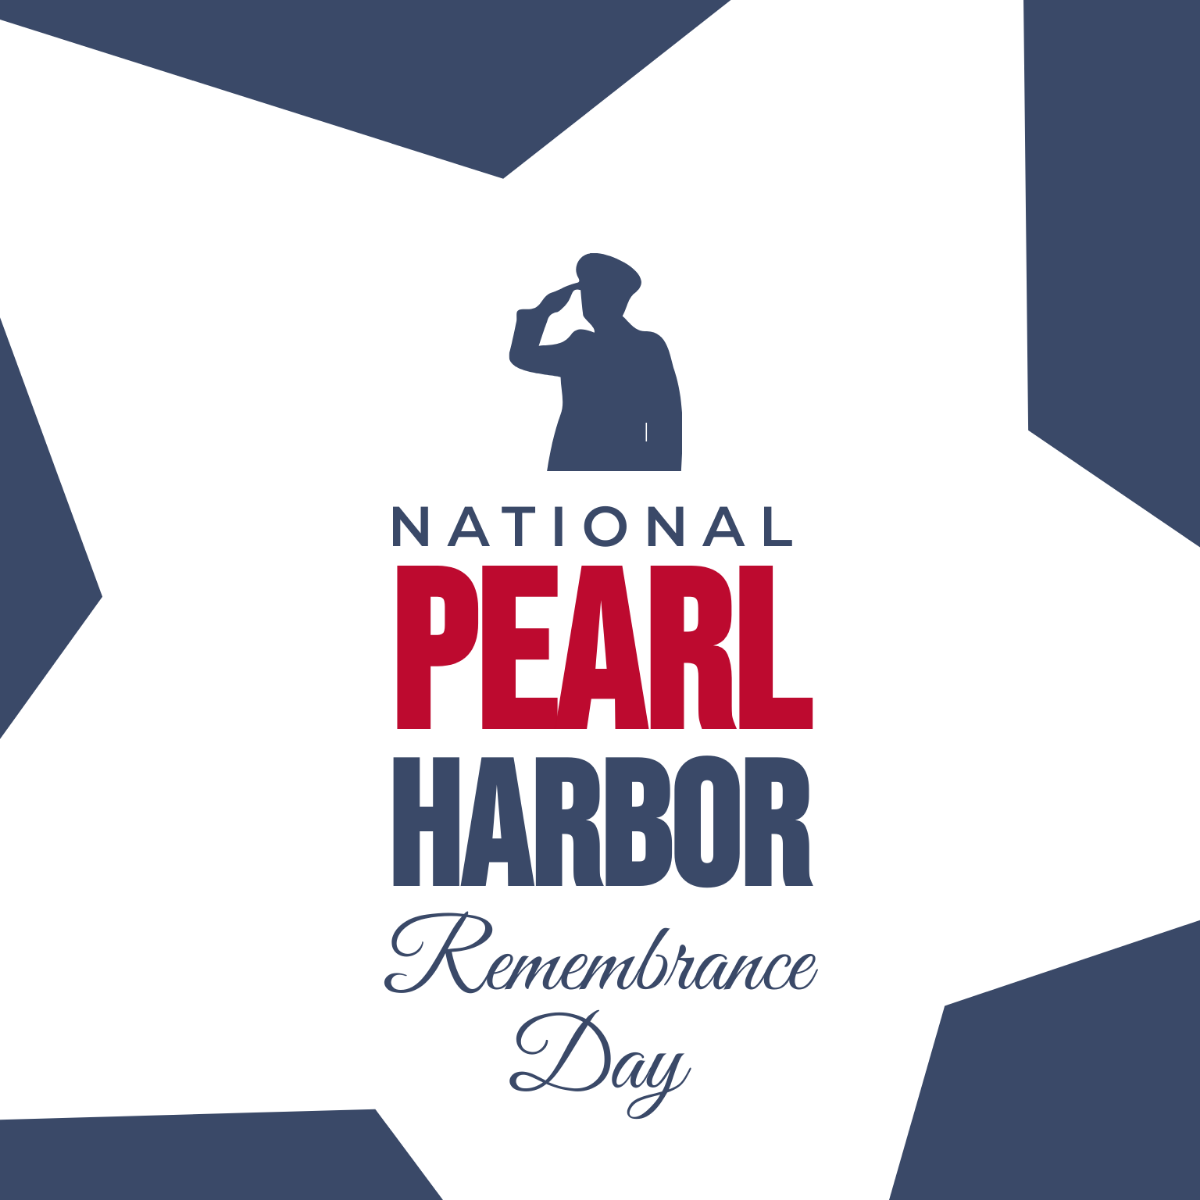 Free National Pearl Harbor Remembrance Day Illustration Template